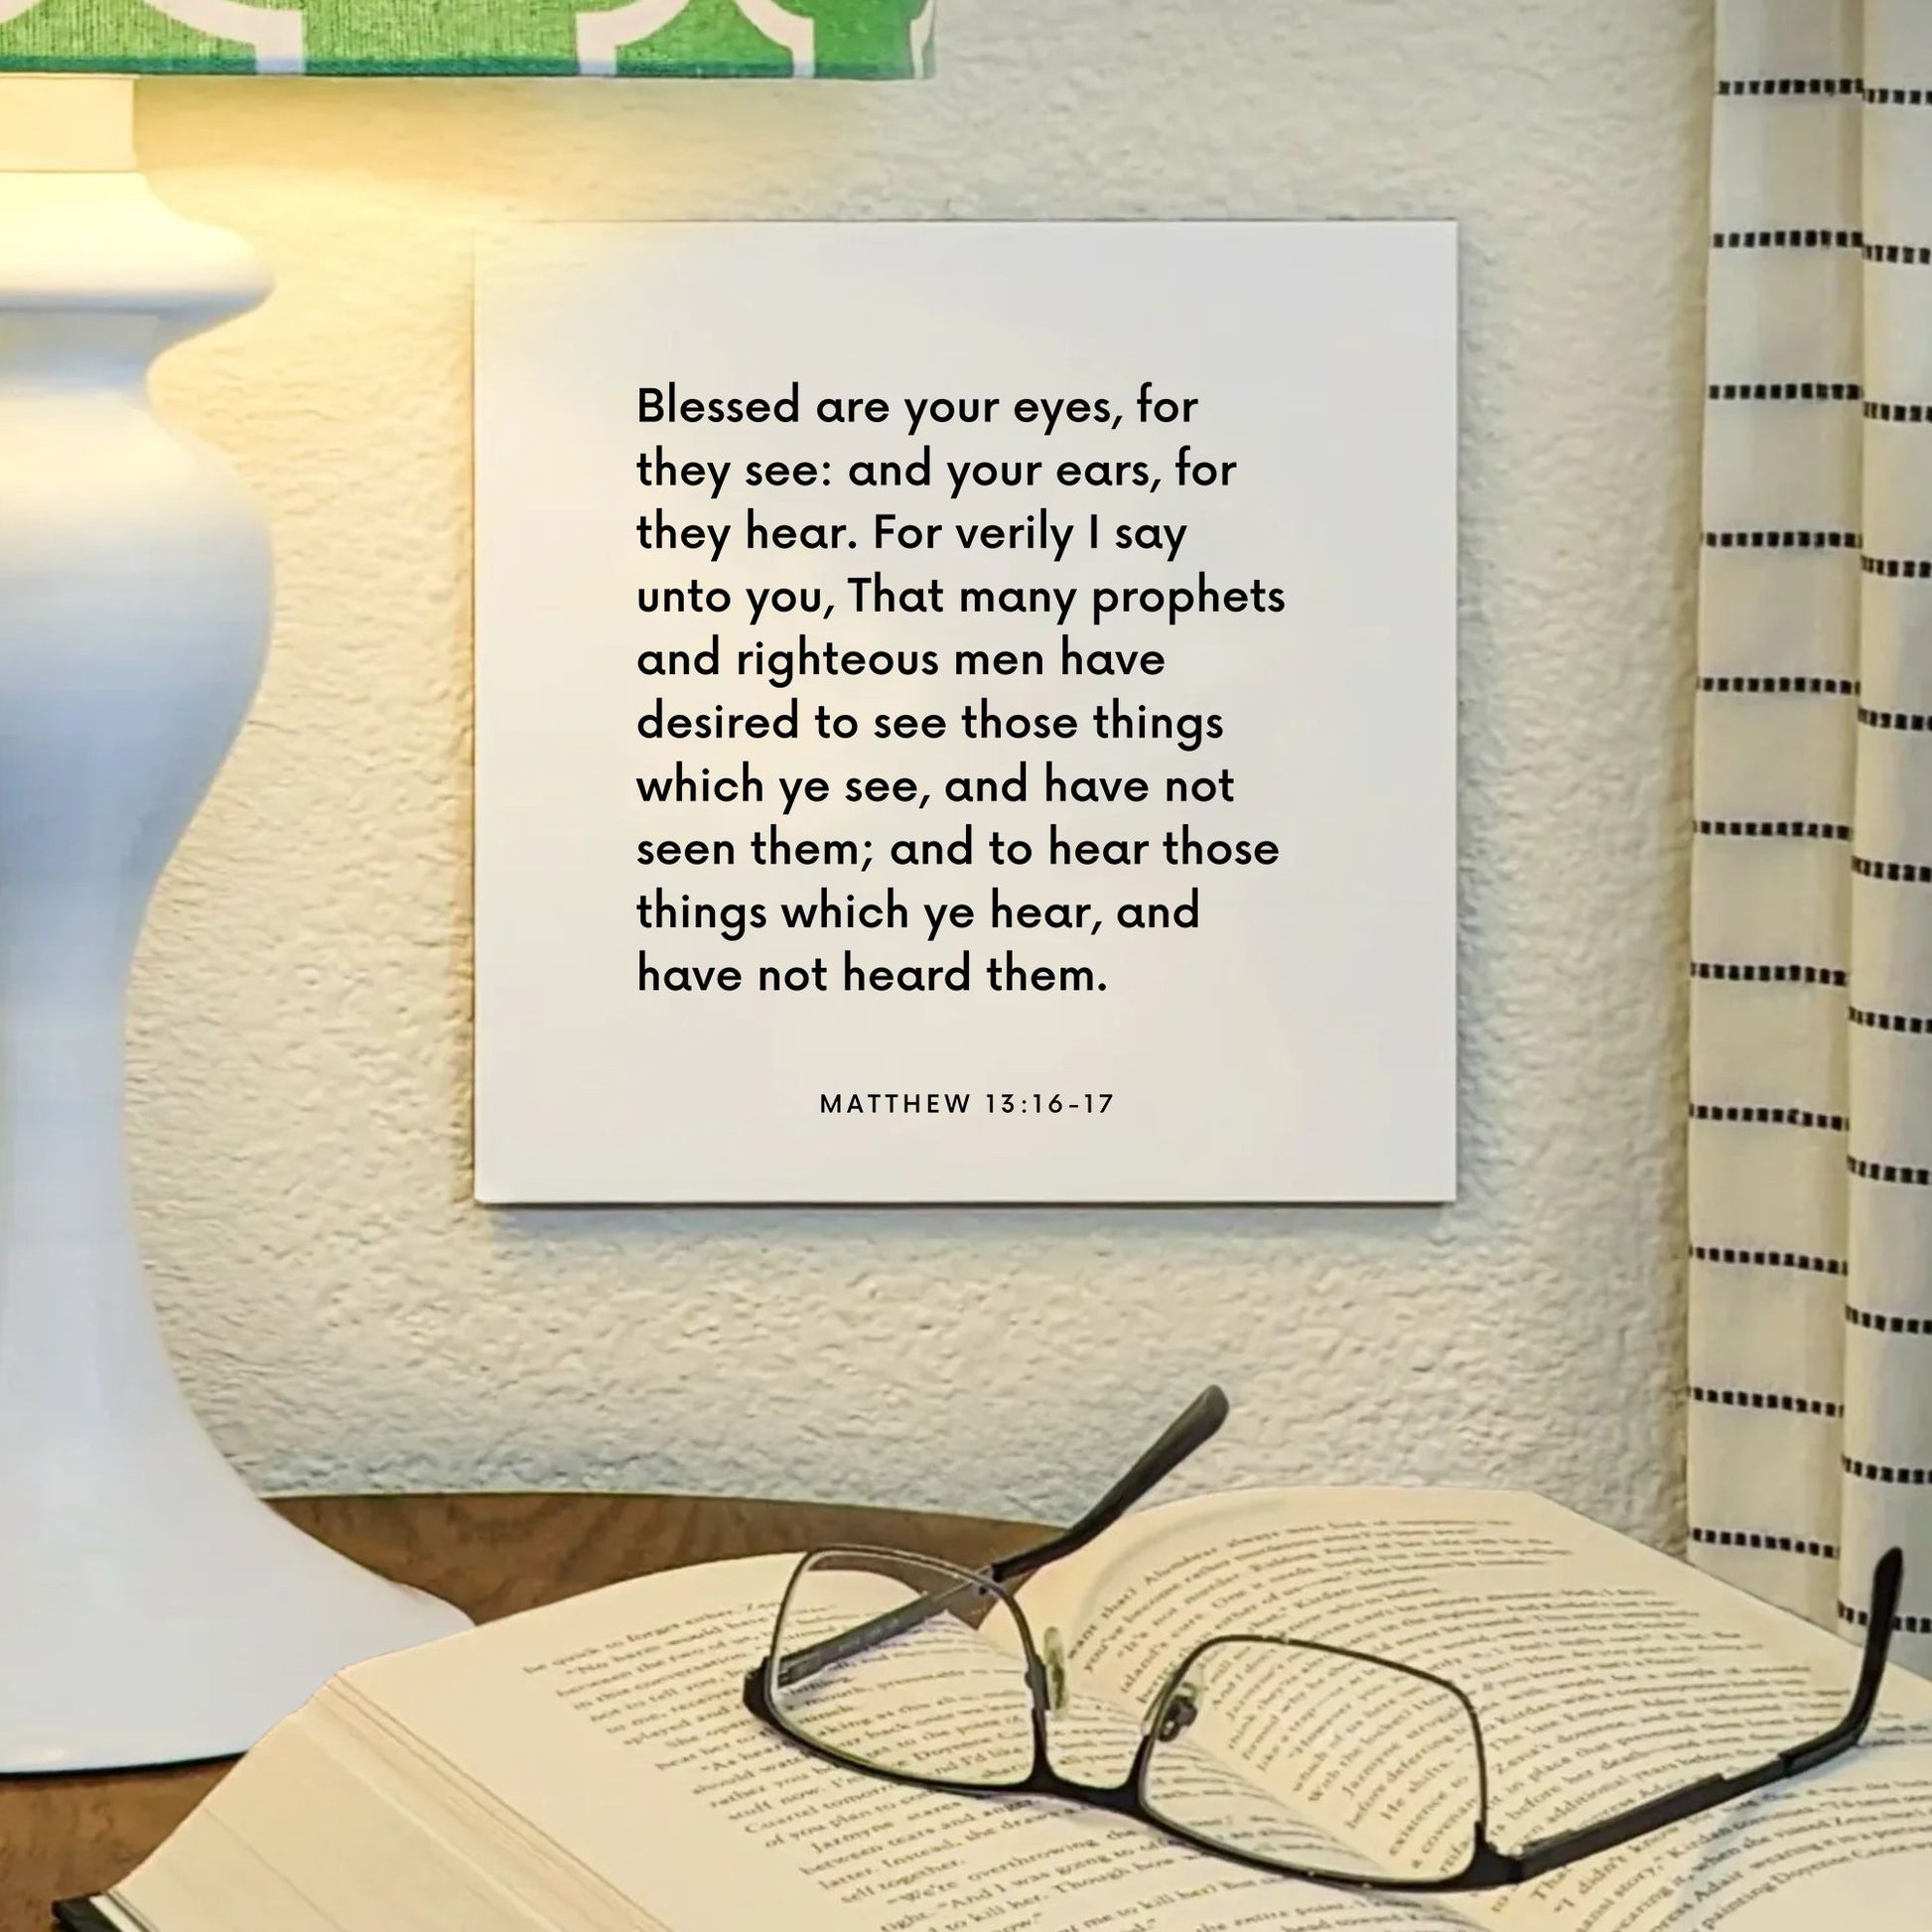 Lamp mouting of the scripture tile for Matthew 13:16-17 - "Blessed are your eyes, for they see"